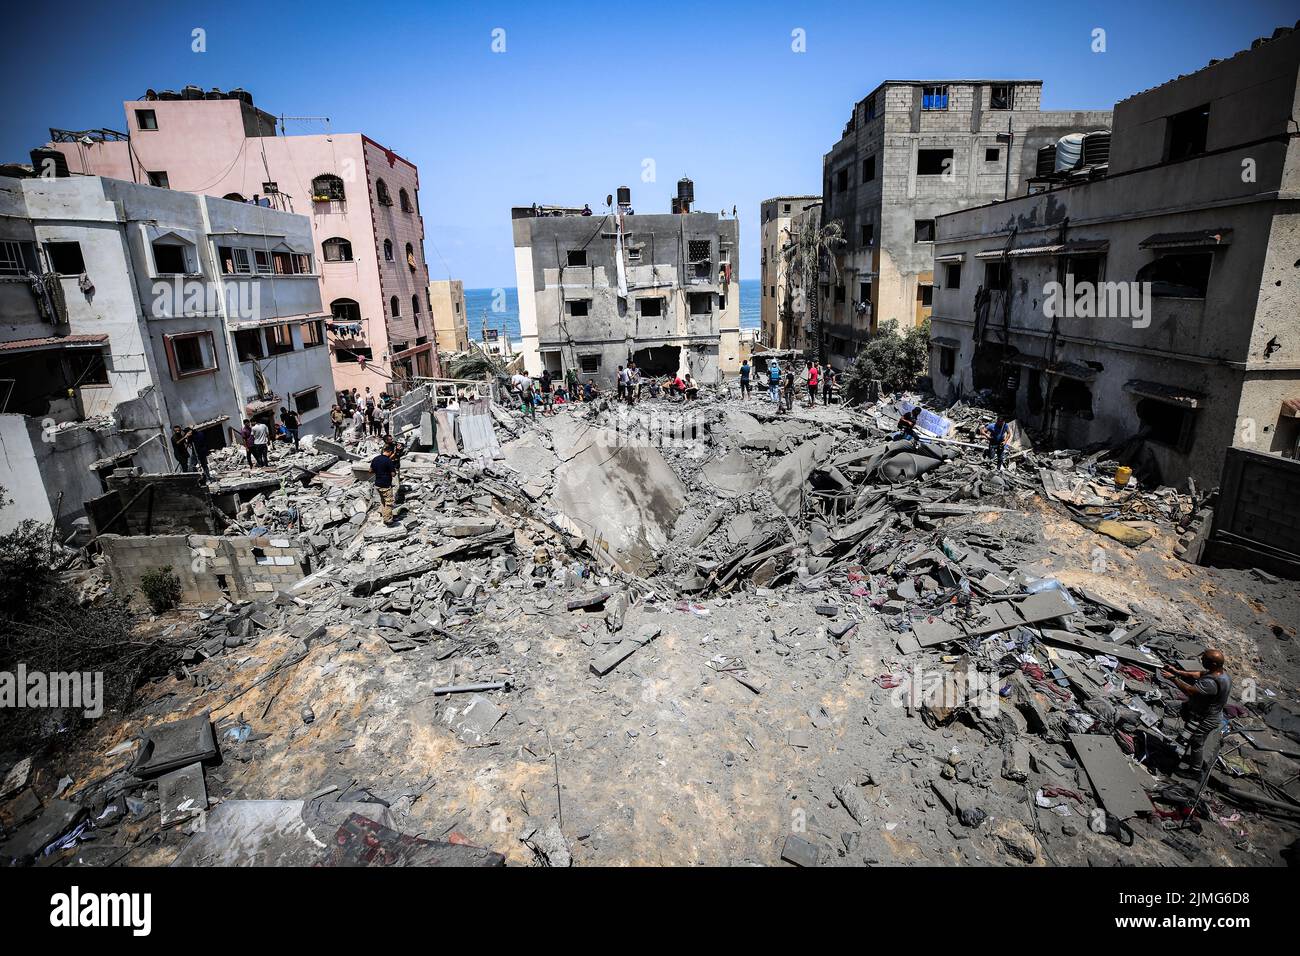 Palestinians inspect a damage building caused by an Israeli air strike in Sheikh Acleyn neighborhood in Gaza. The Israeli military launched deadly strikes against what it said were Islamic Jihad targets in Gaza as tensions continue to rise between Israel and Palestinian militant groups. Stock Photo